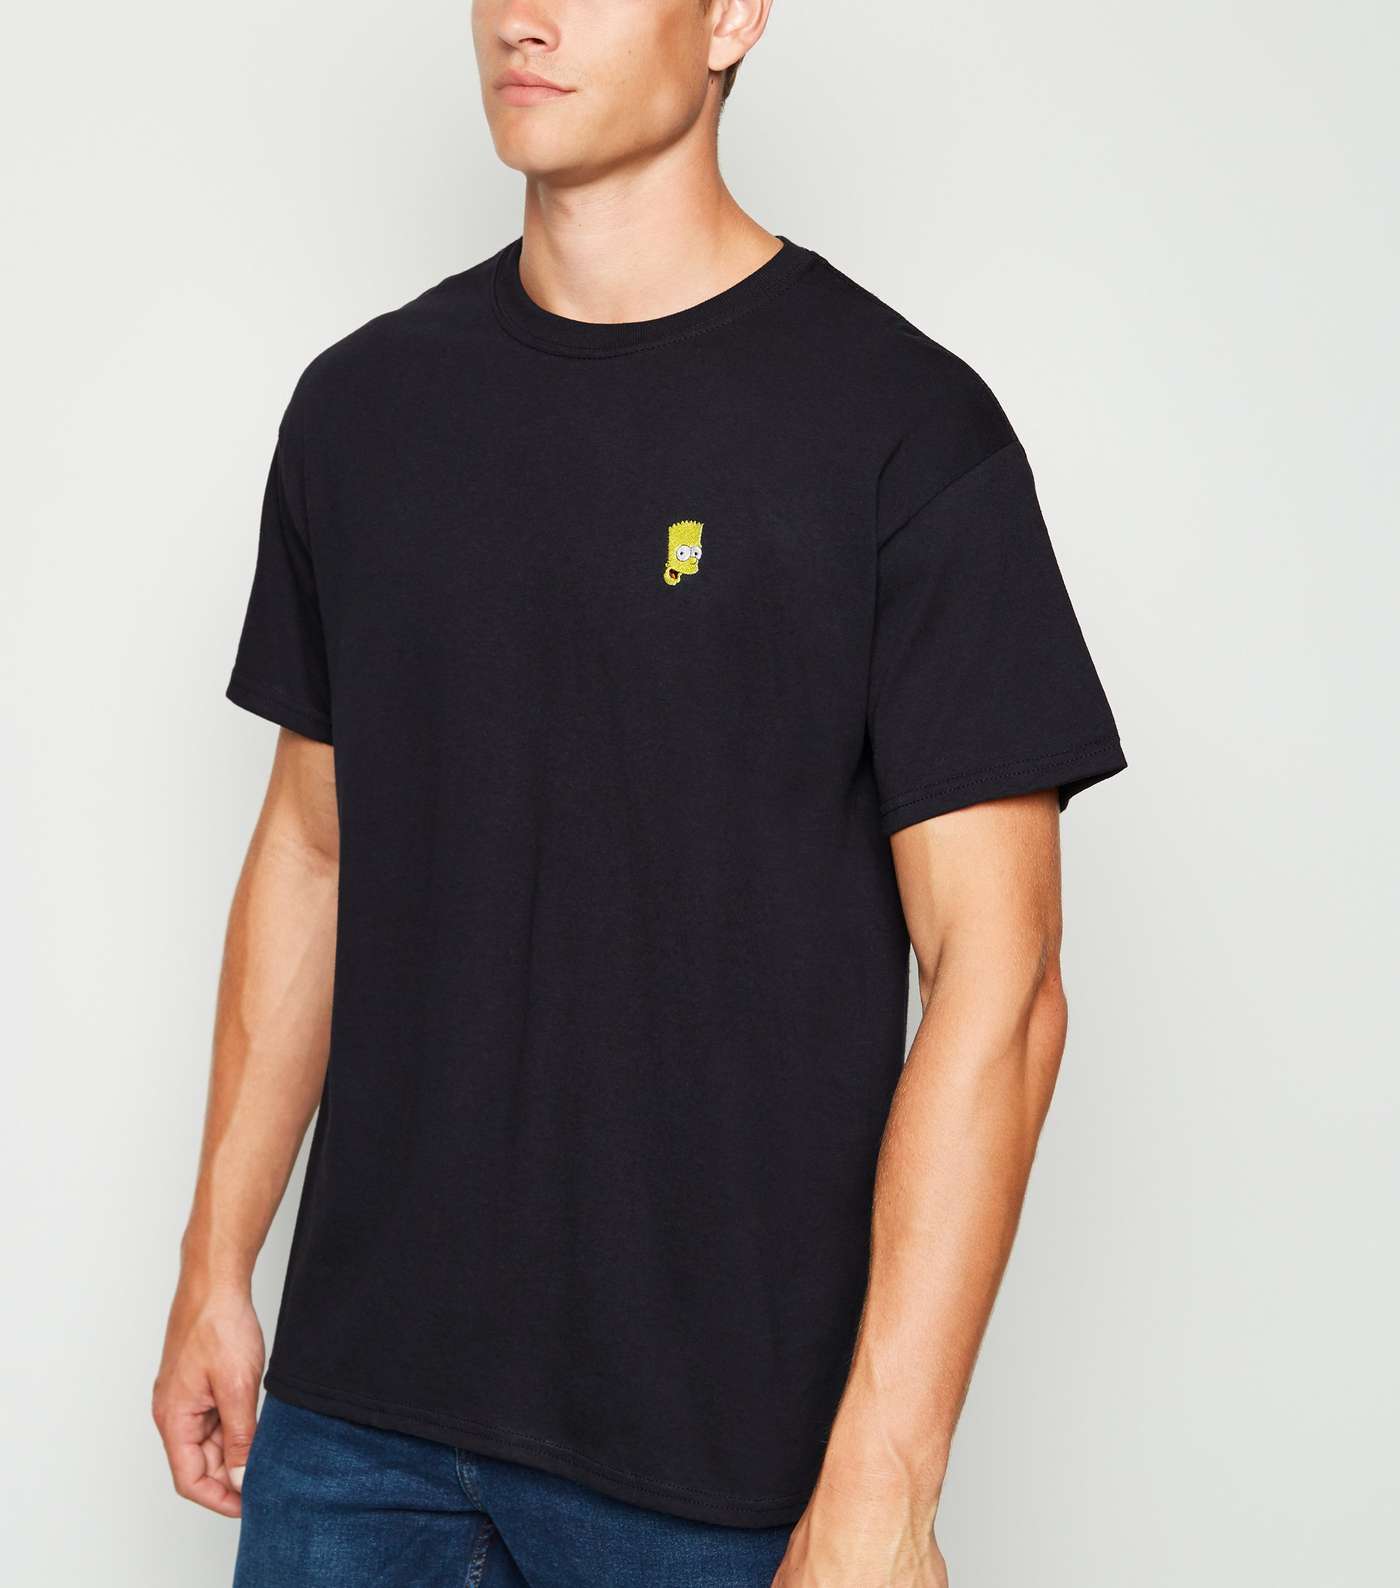 Black Embroidered Bart Simpson T-Shirt